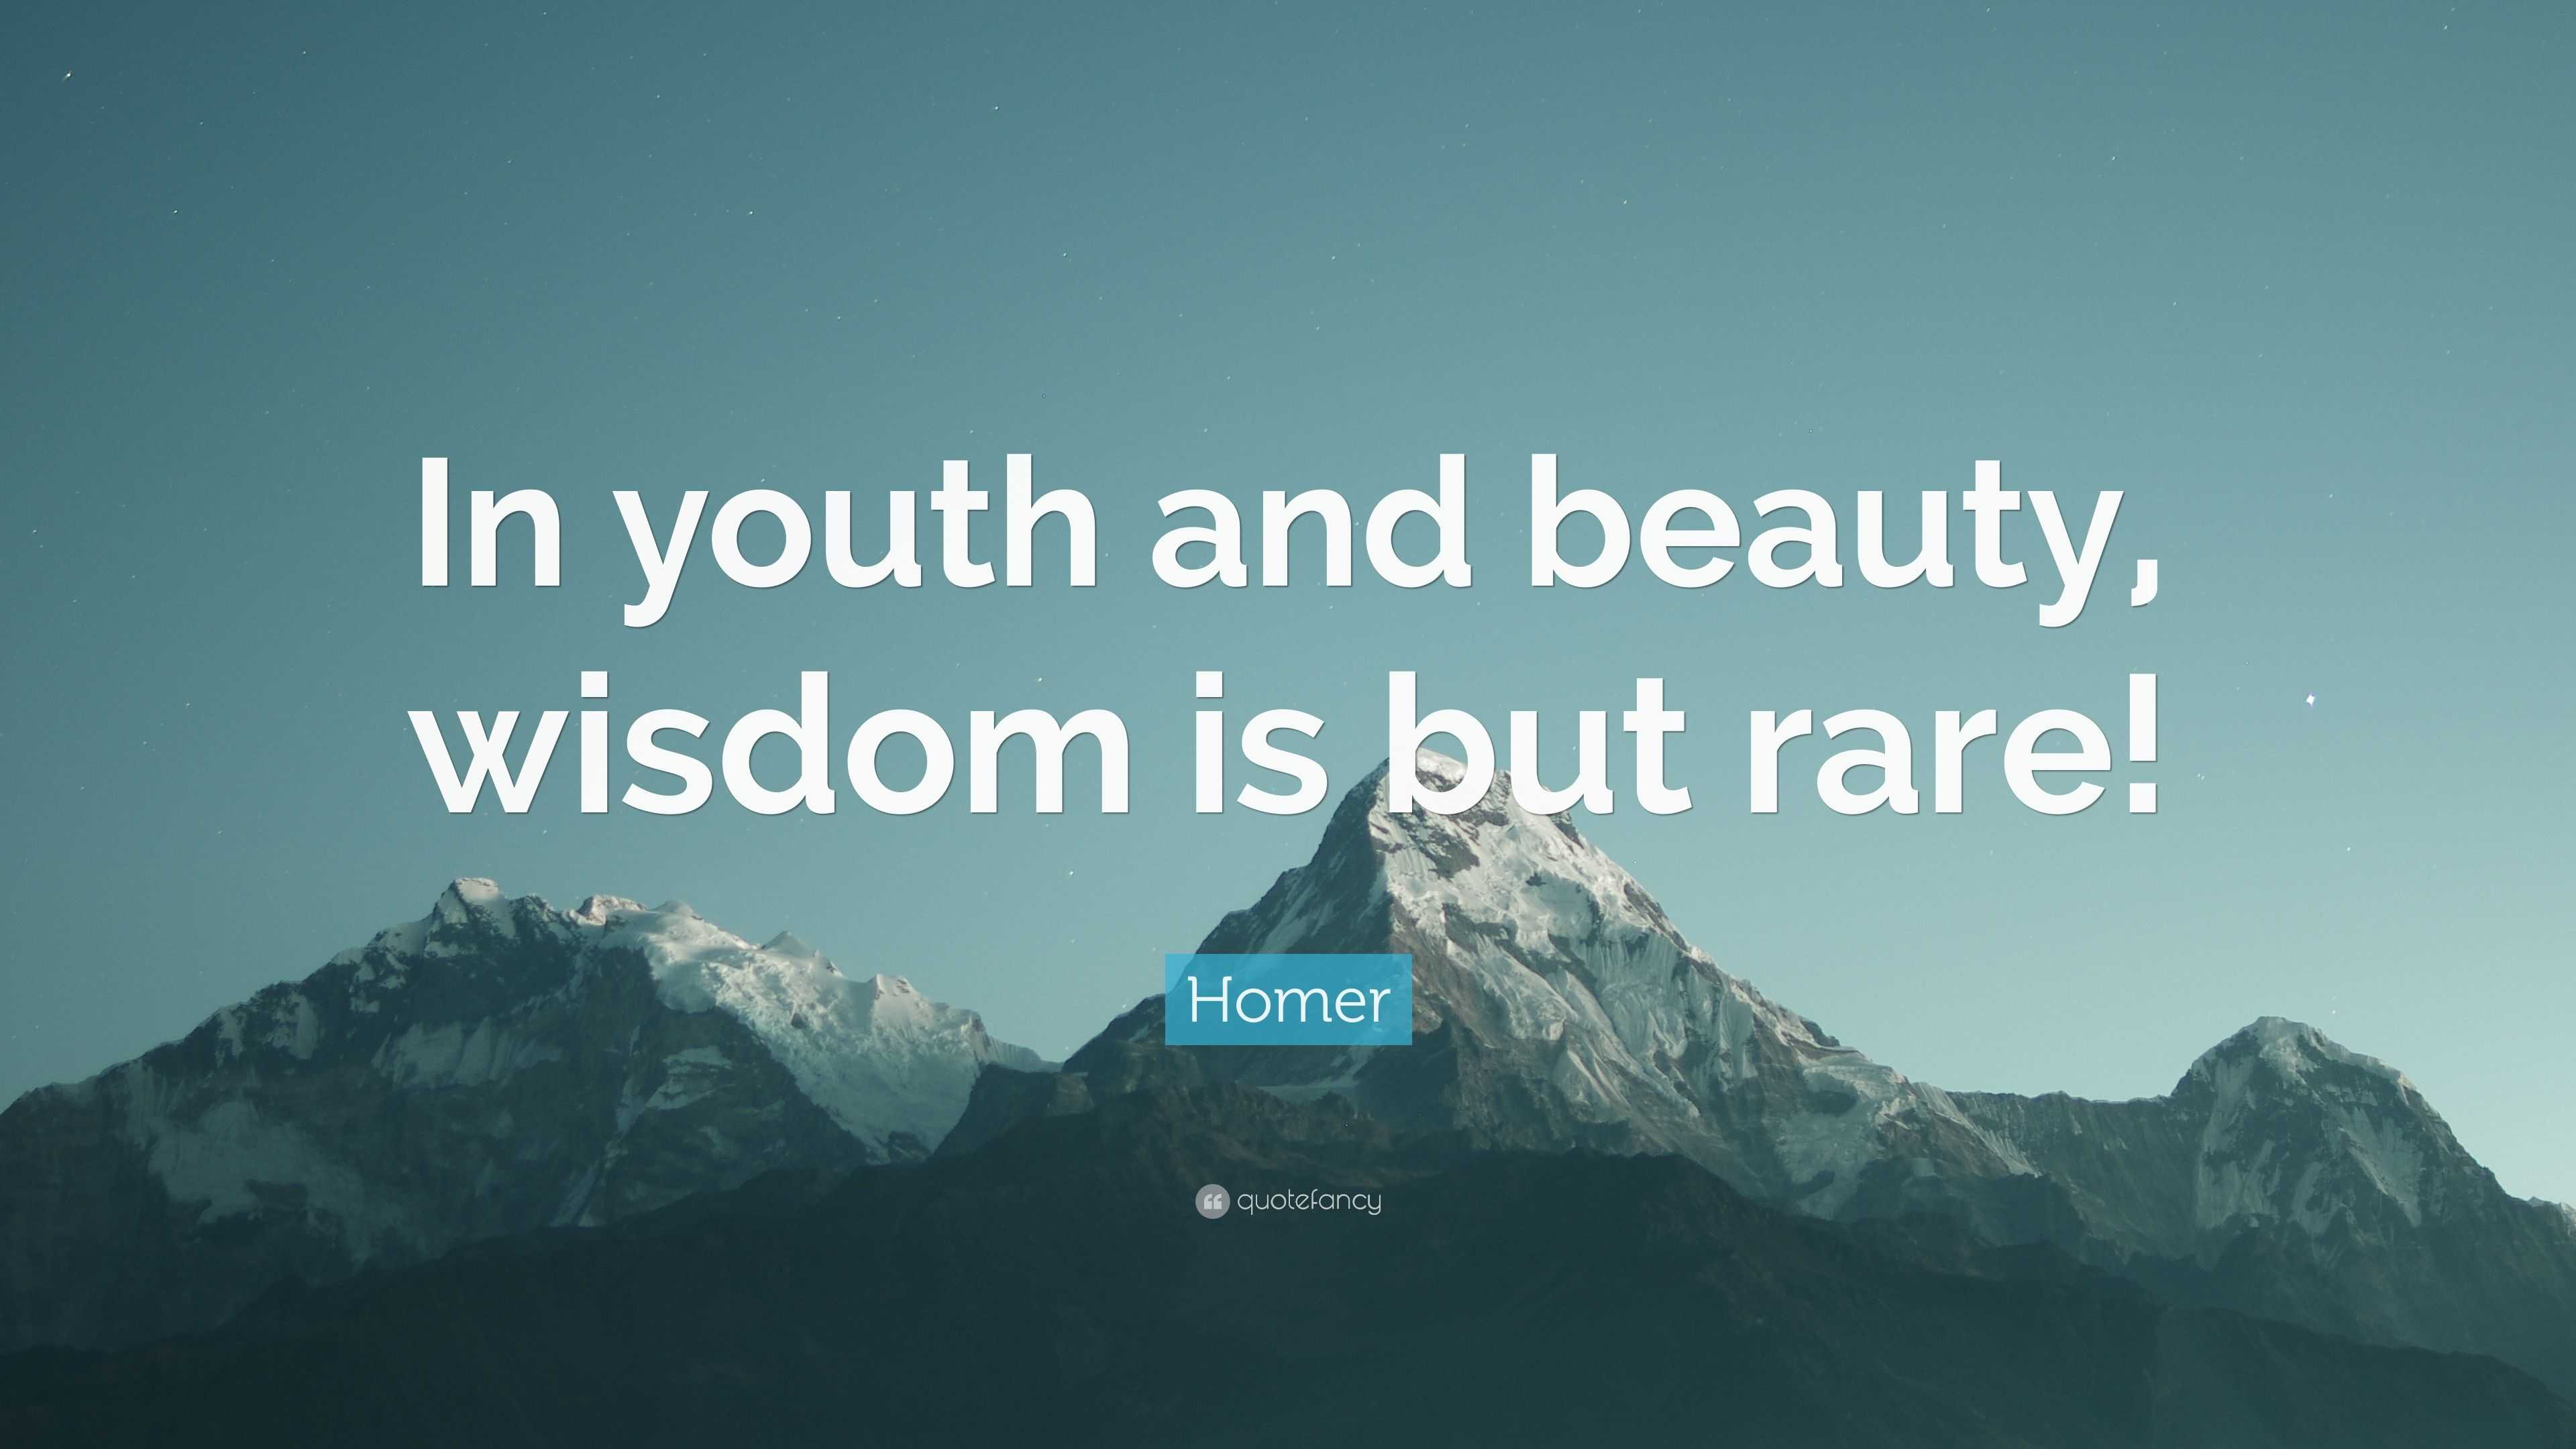 Homer Quote: “In youth and beauty, wisdom is but rare!”